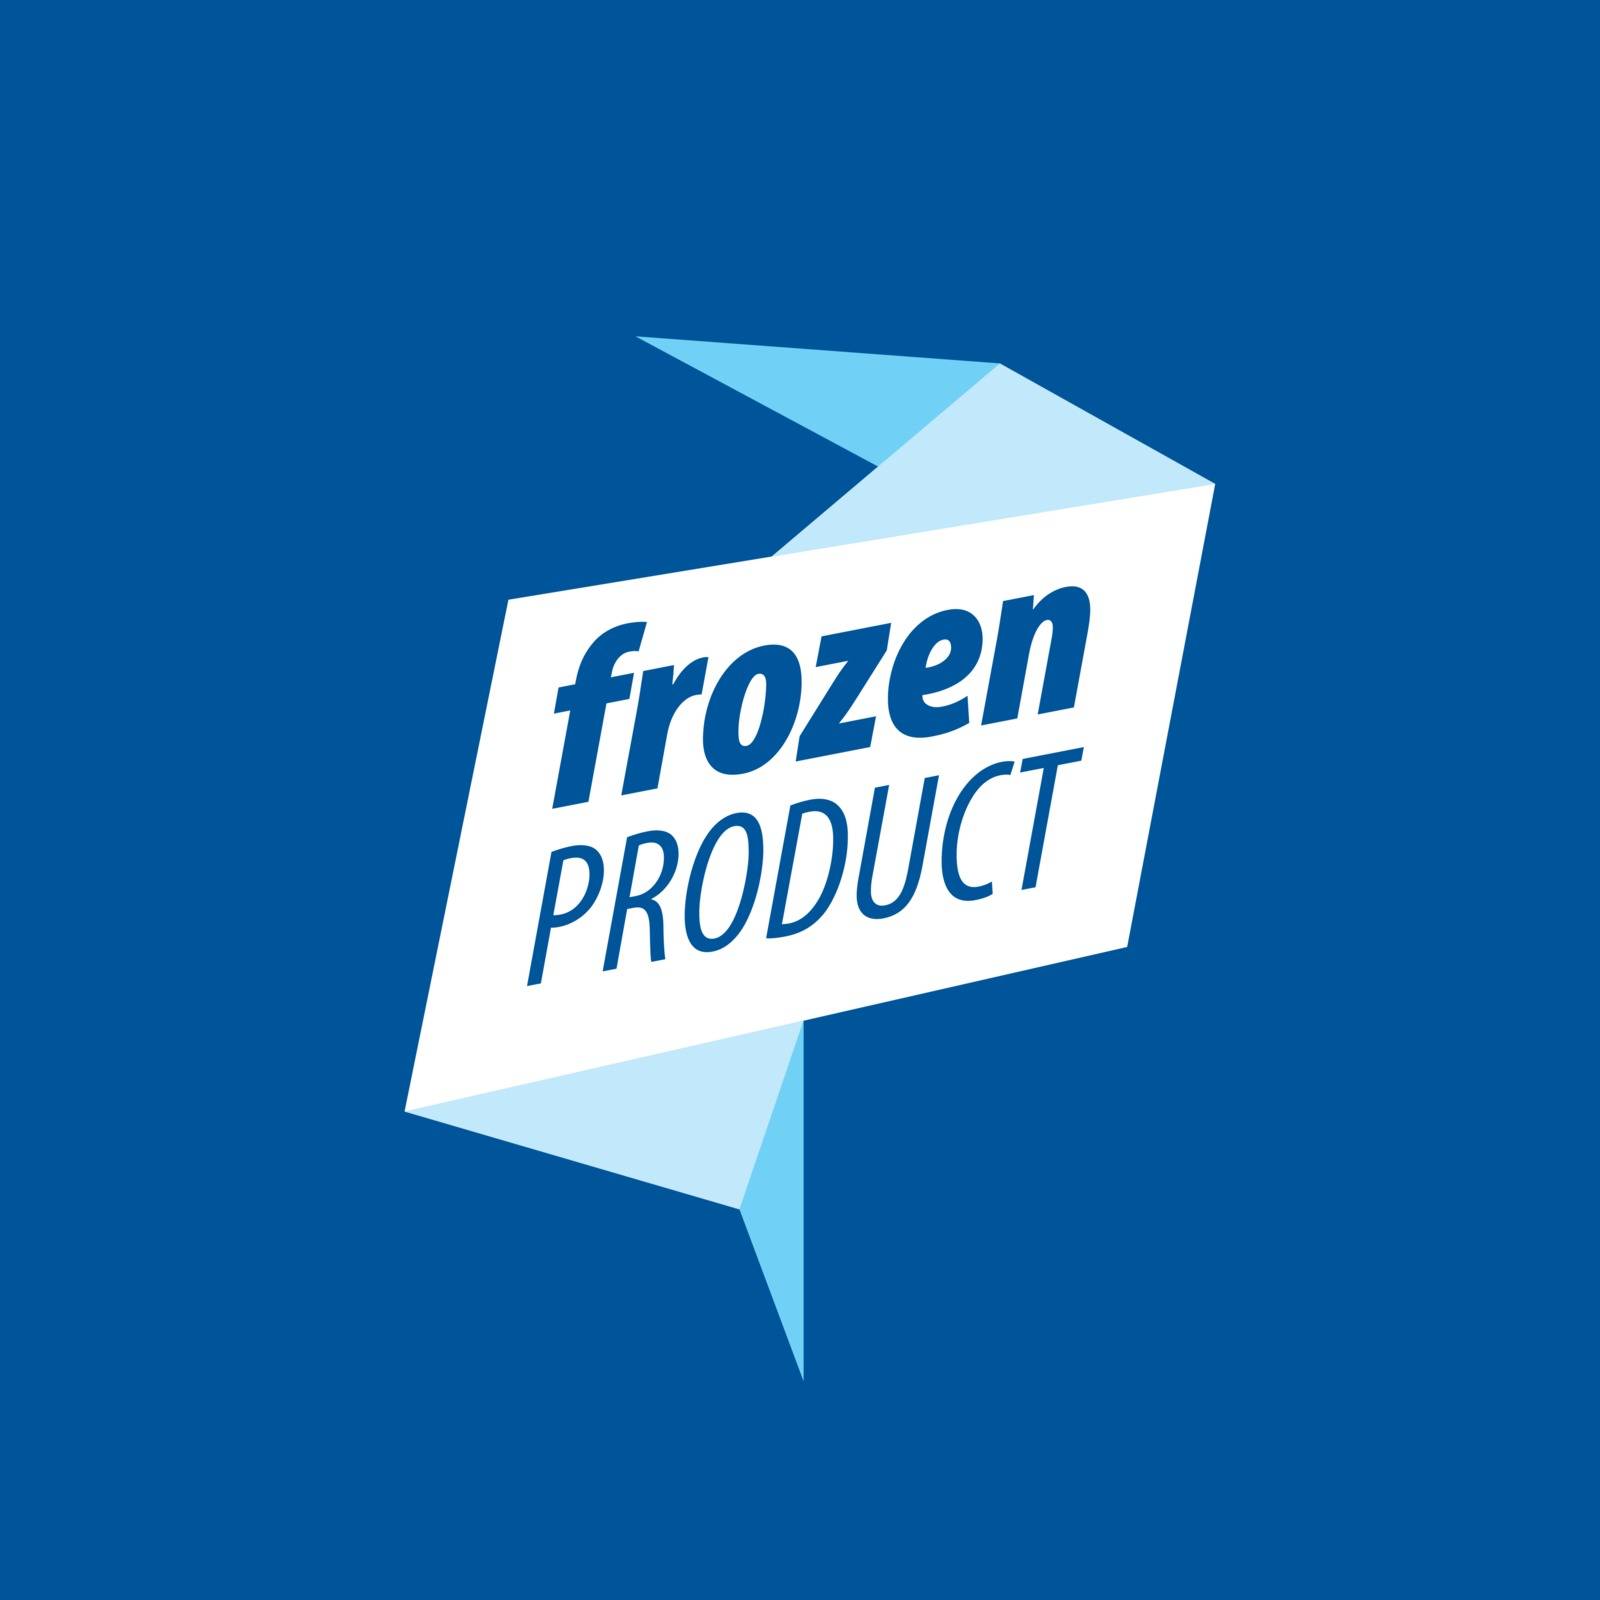 Abstract vector logo for frozen products. Design element